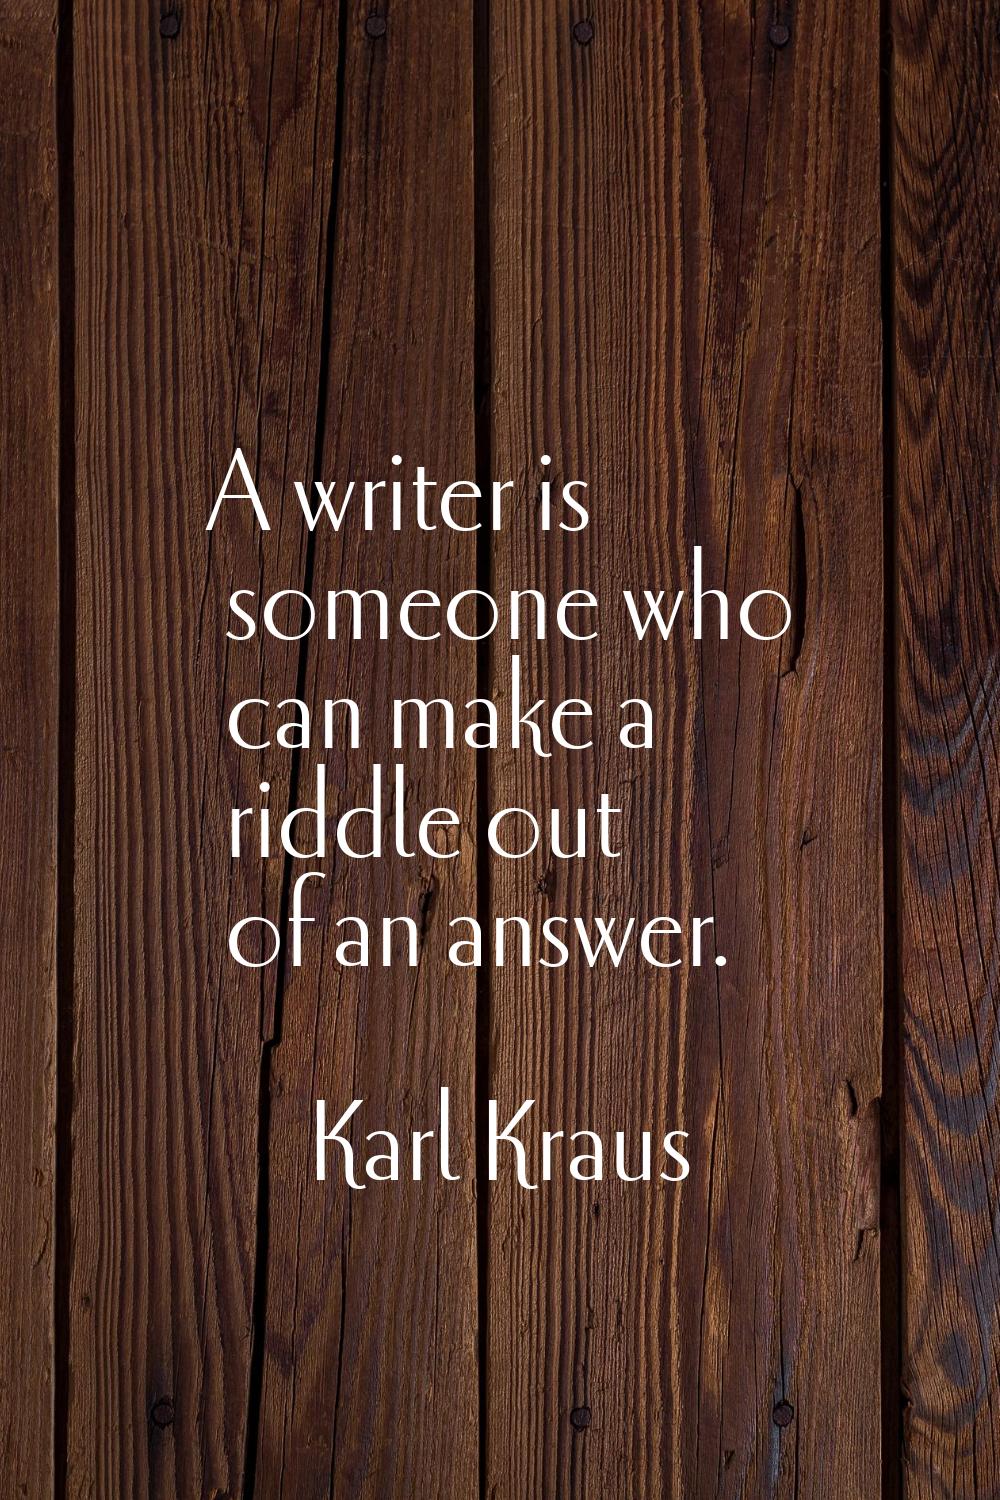 A writer is someone who can make a riddle out of an answer.